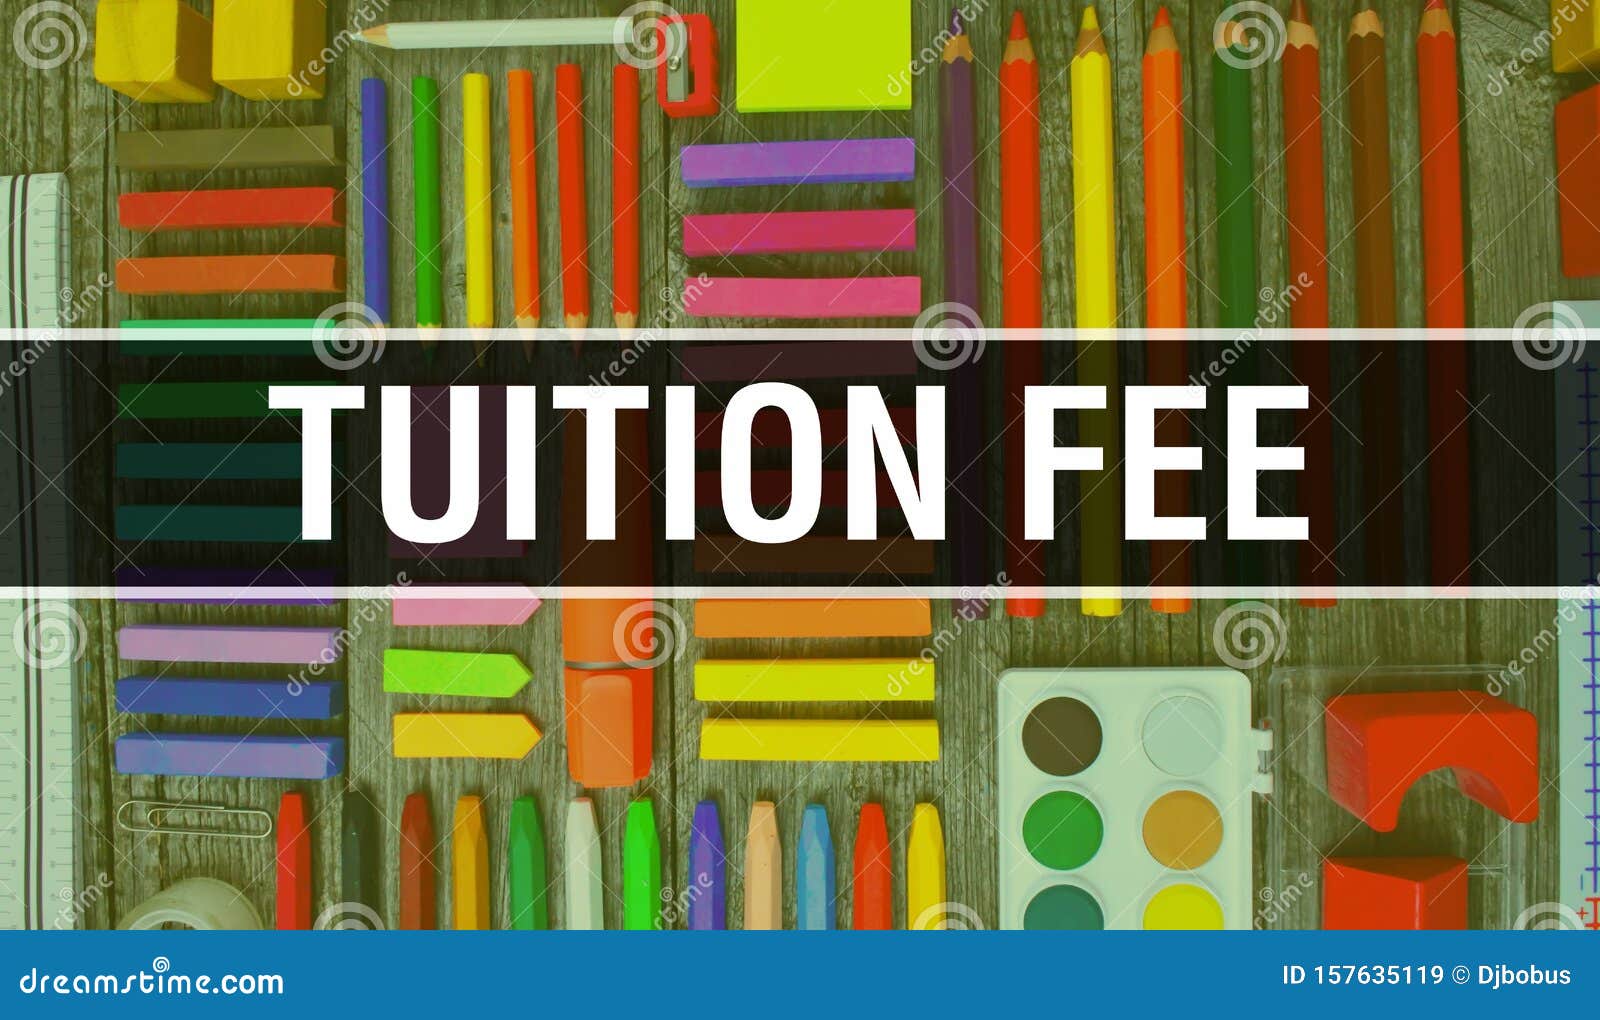 Tuition Fee Text with Back To School Wallpaper. Tuition Fee and School  Education Background Concept Stock Image - Image of colorful, concept:  157635119